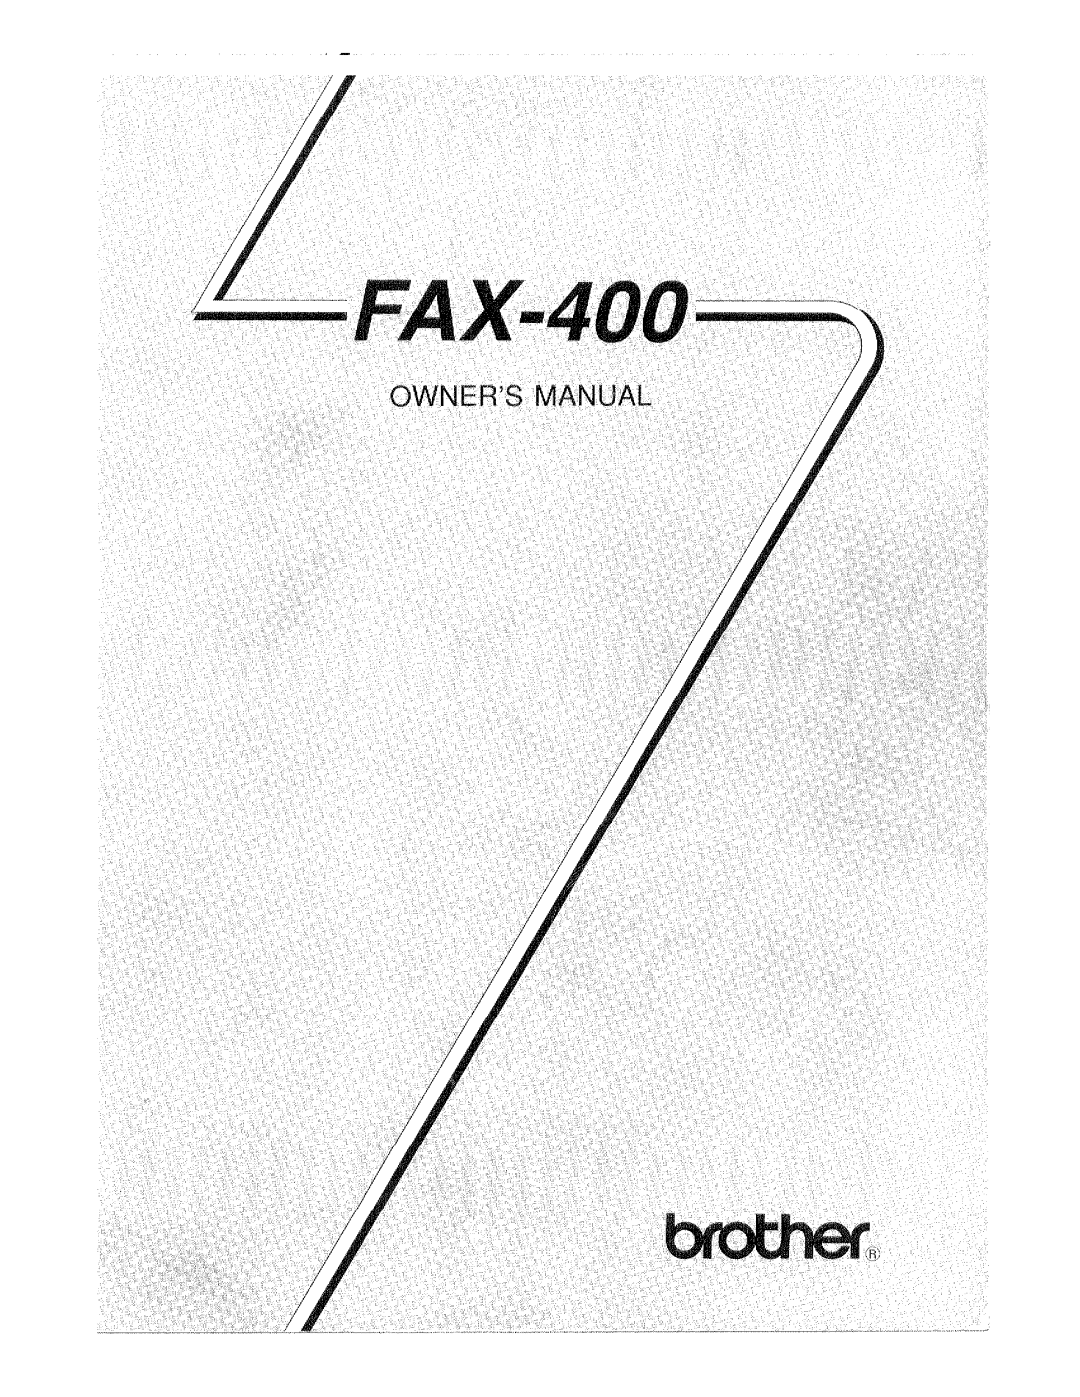 Brother FAX-400 manual 